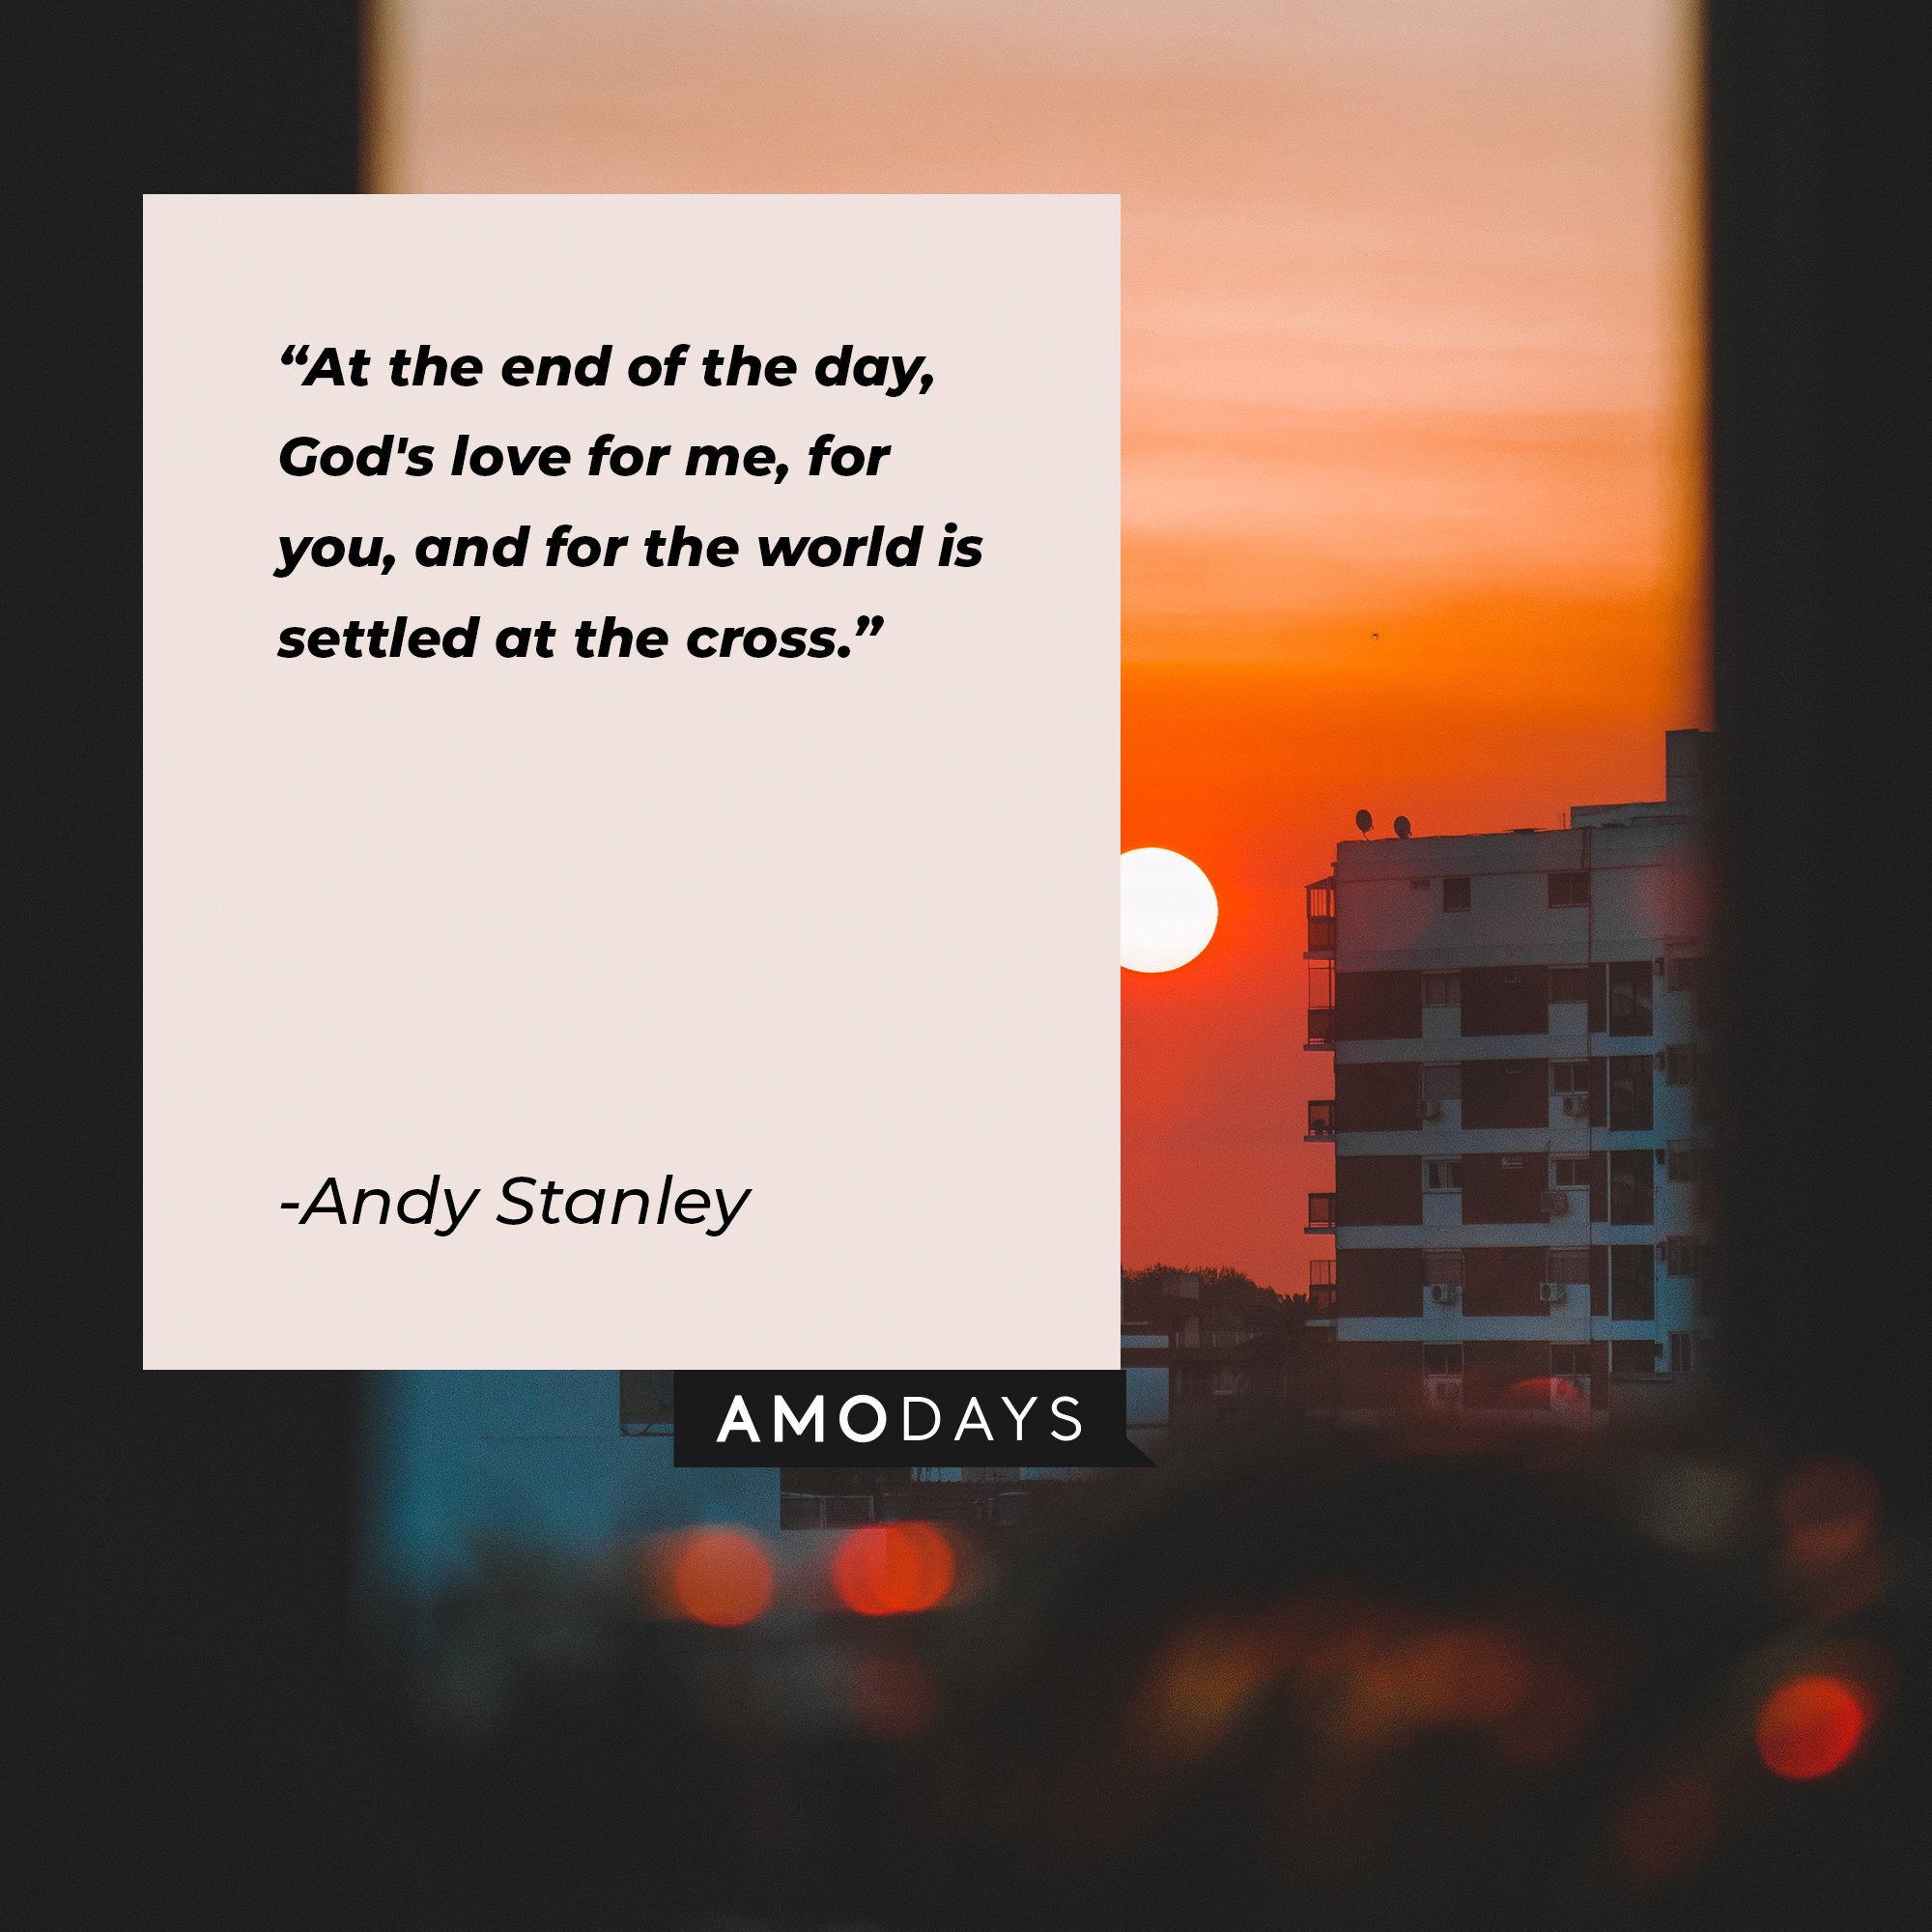 Andy Stanley’s quote: “At the end of the day, God's love for me, for you, and for the world is settled at the cross.” | Image: AmoDays    